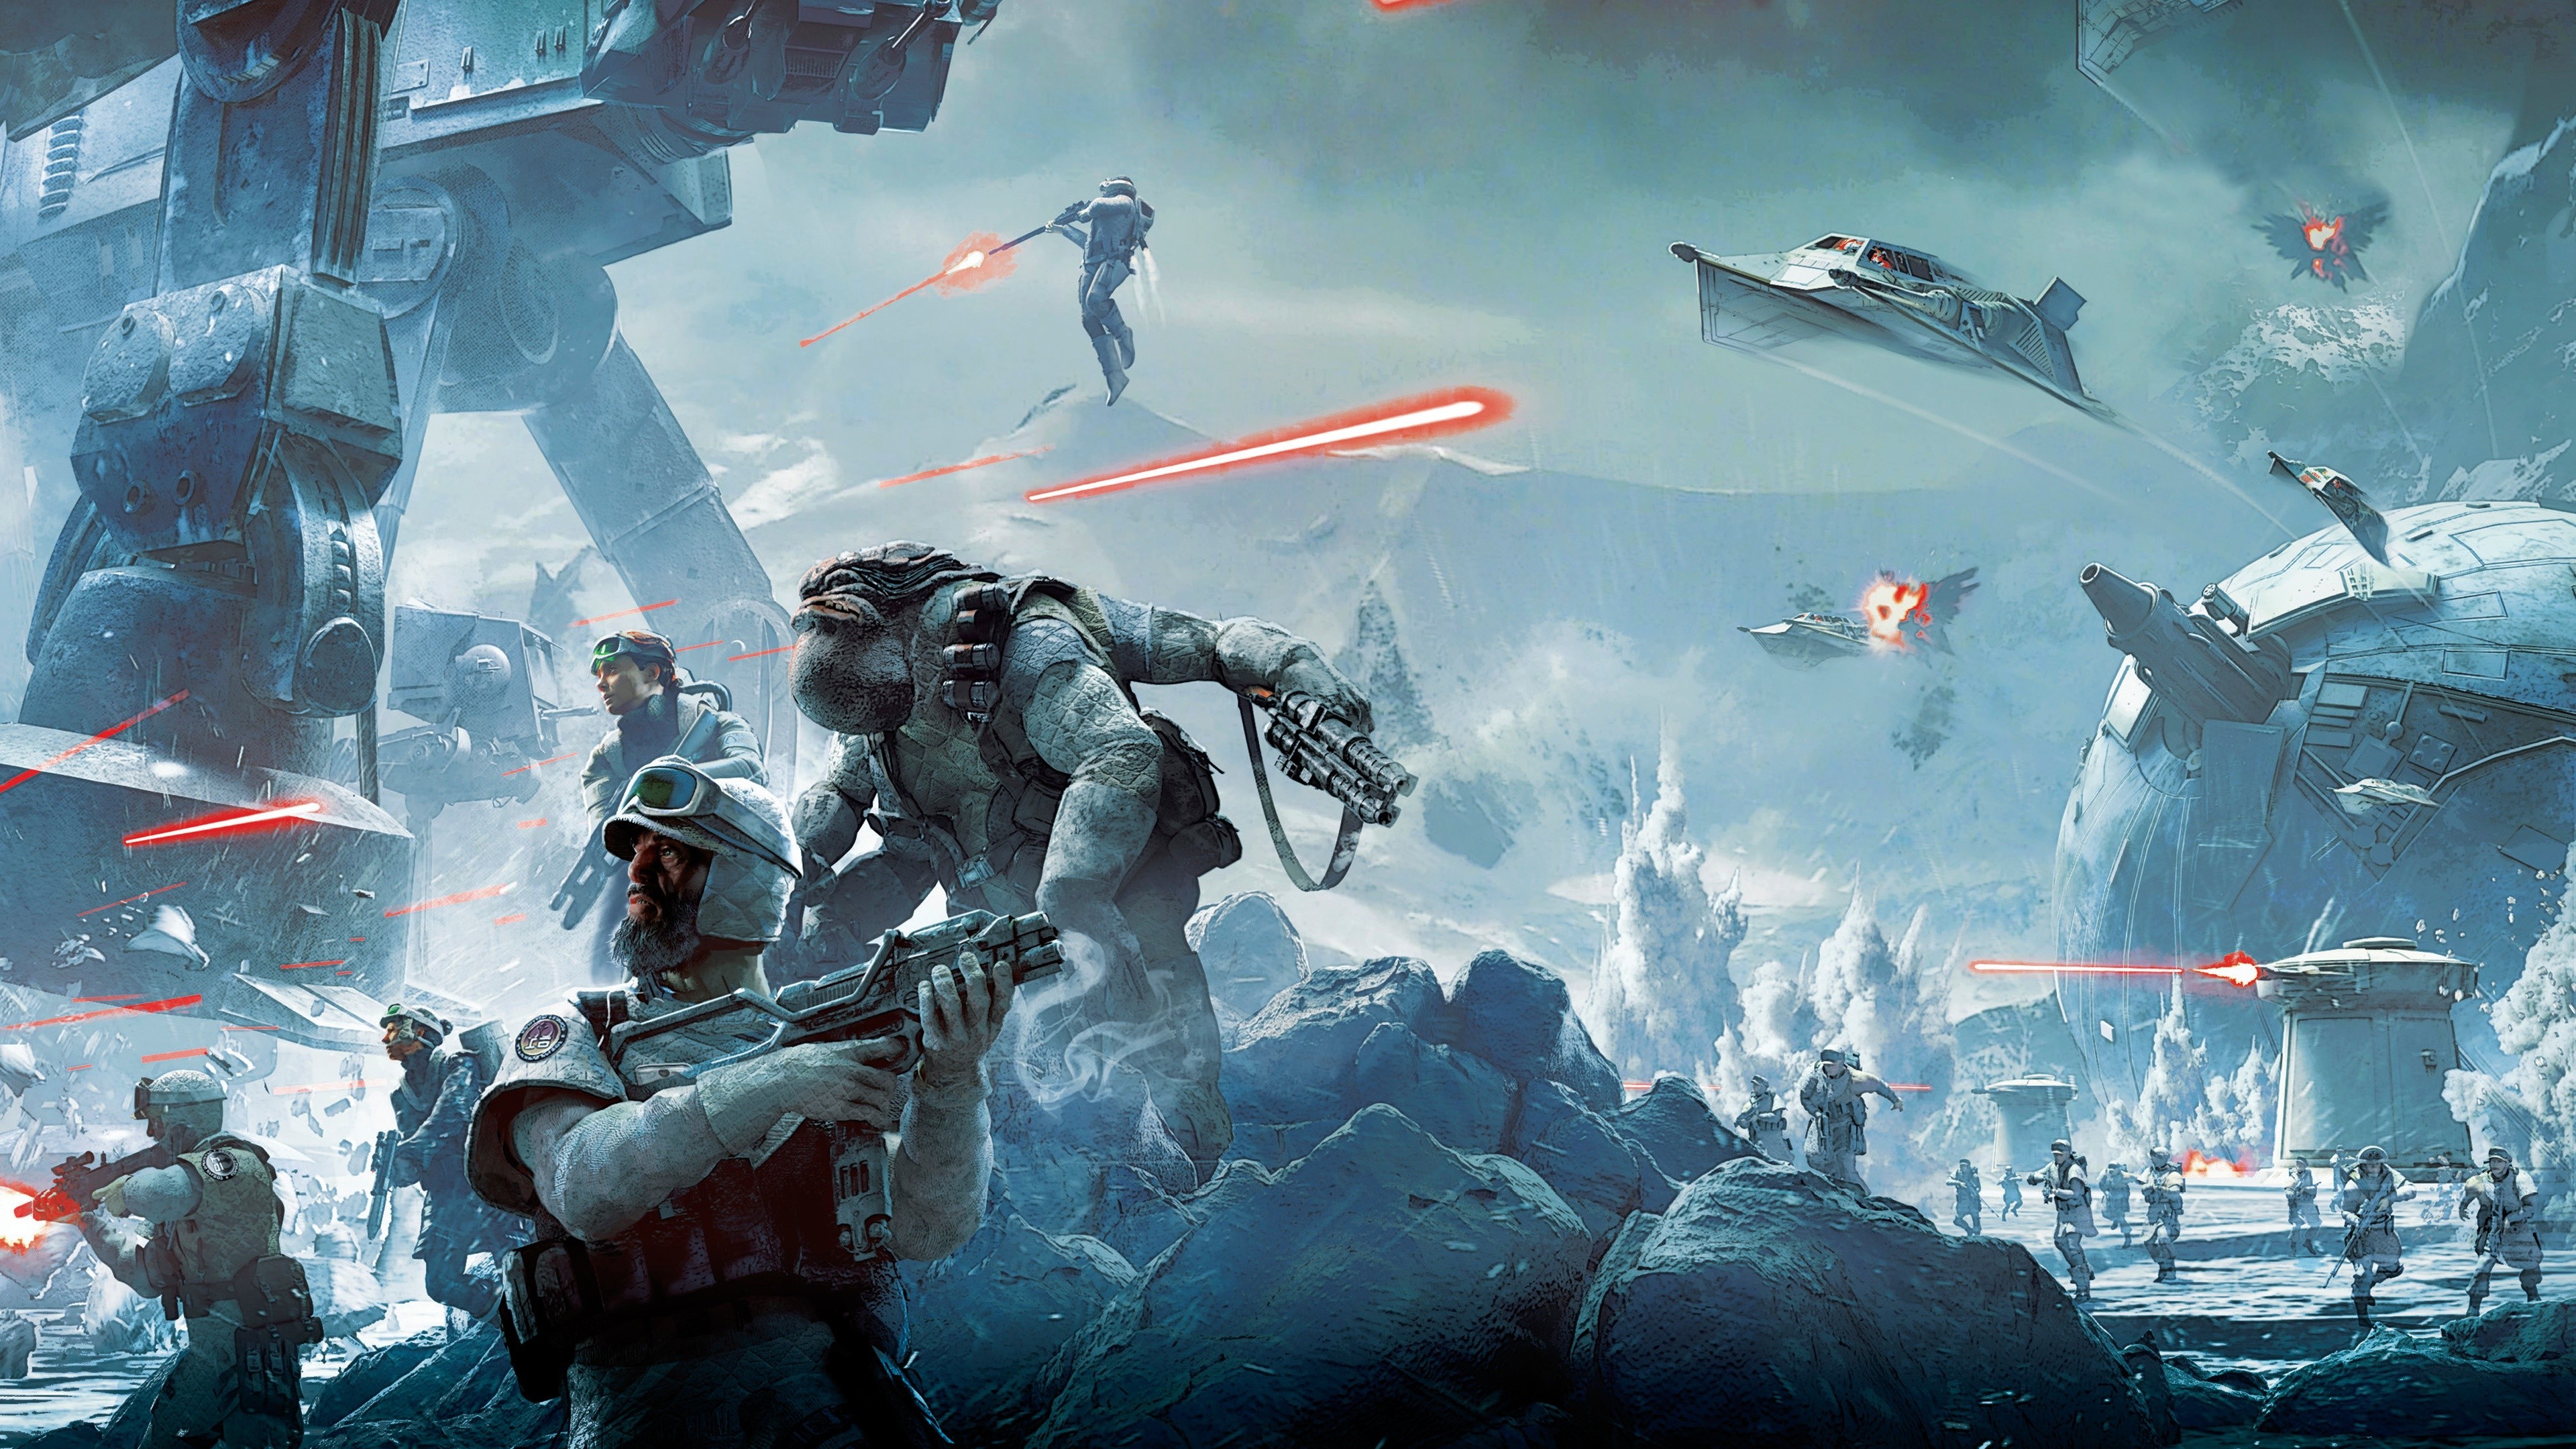 star wars battle wallpaper,action adventure game,pc game,strategy video game,games,mecha